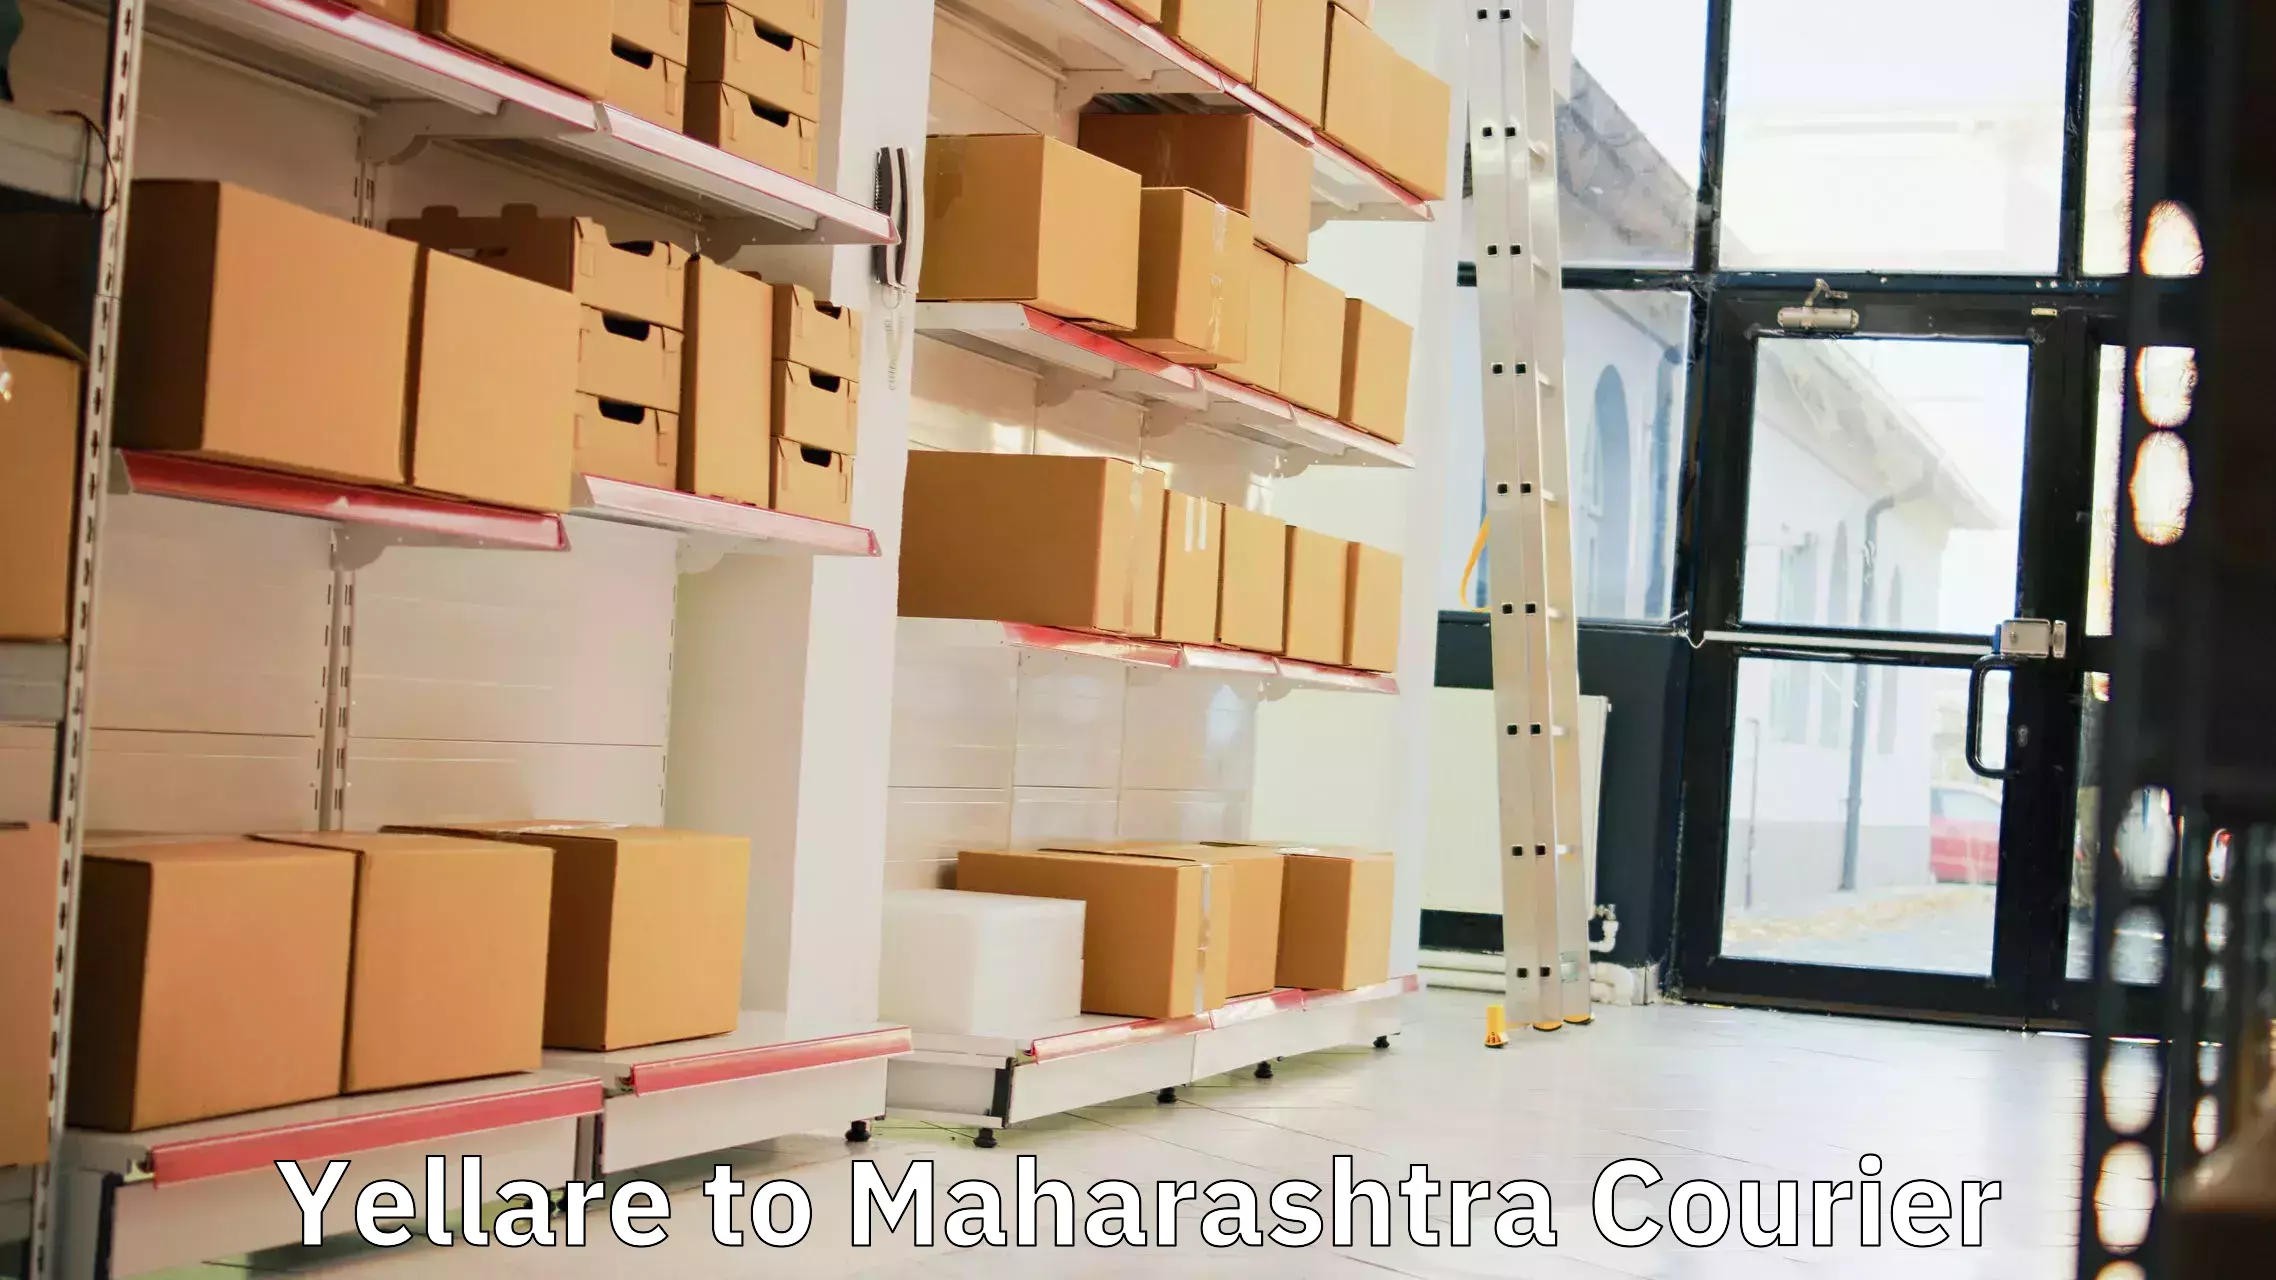 Customer-oriented courier services Yellare to Maharashtra